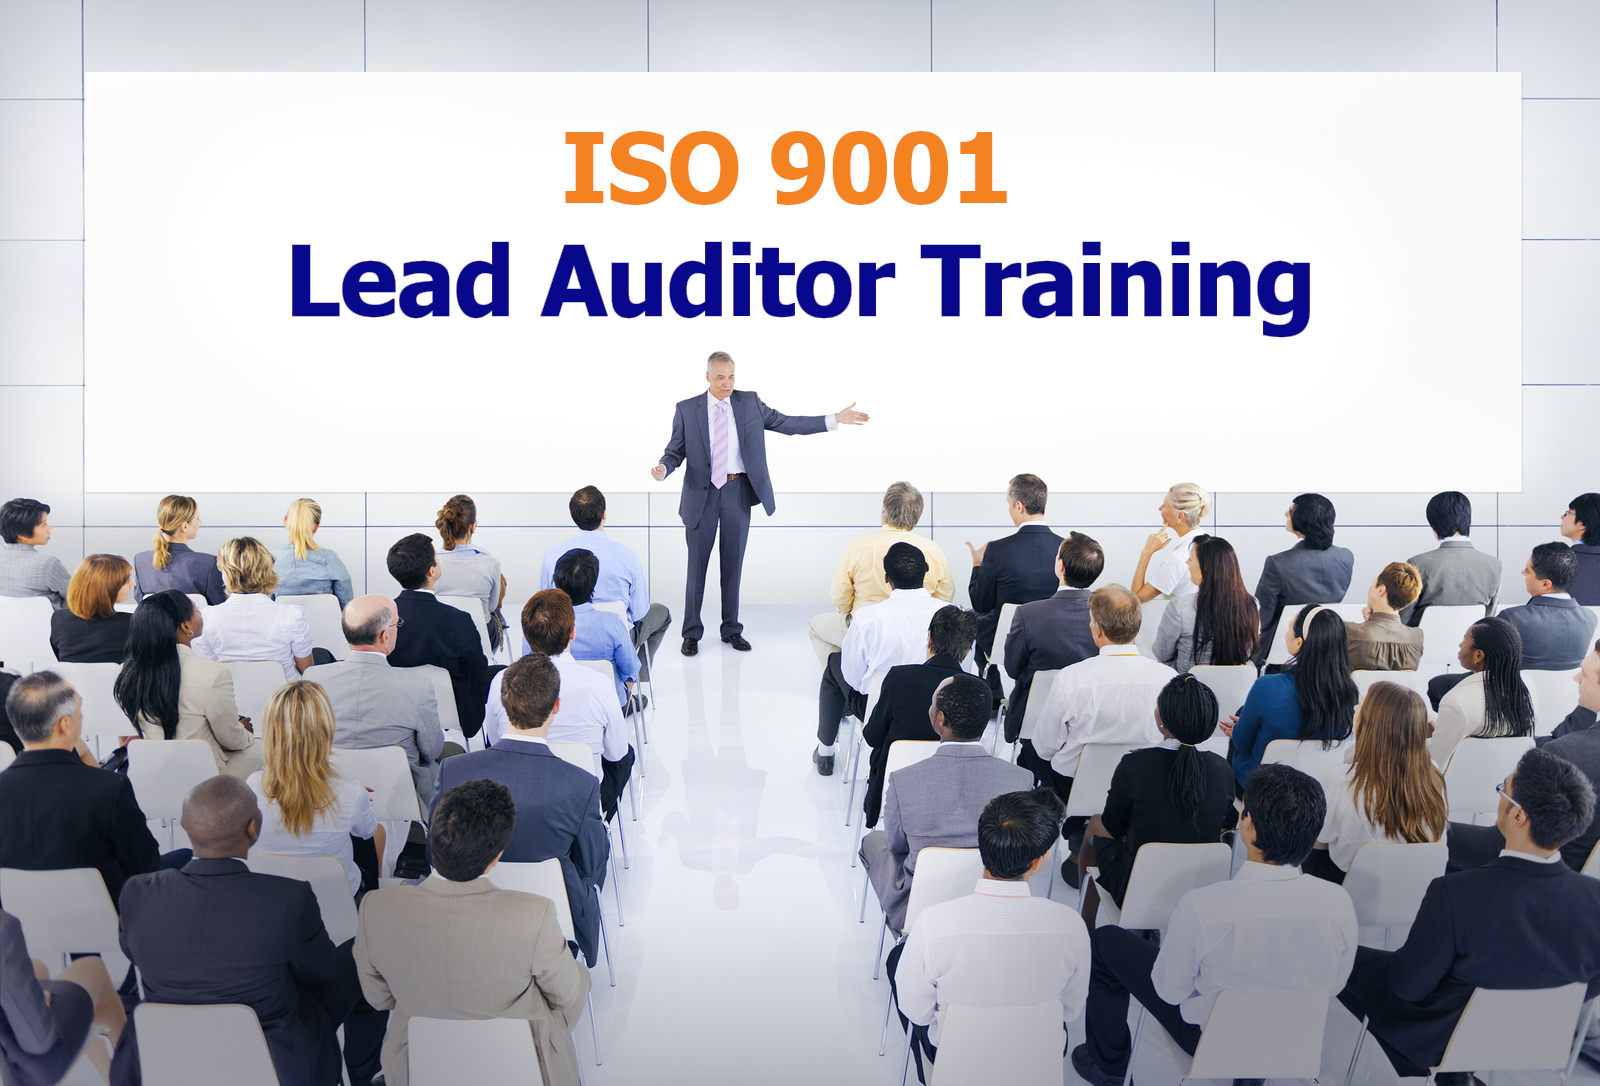 Auditor course in Houston